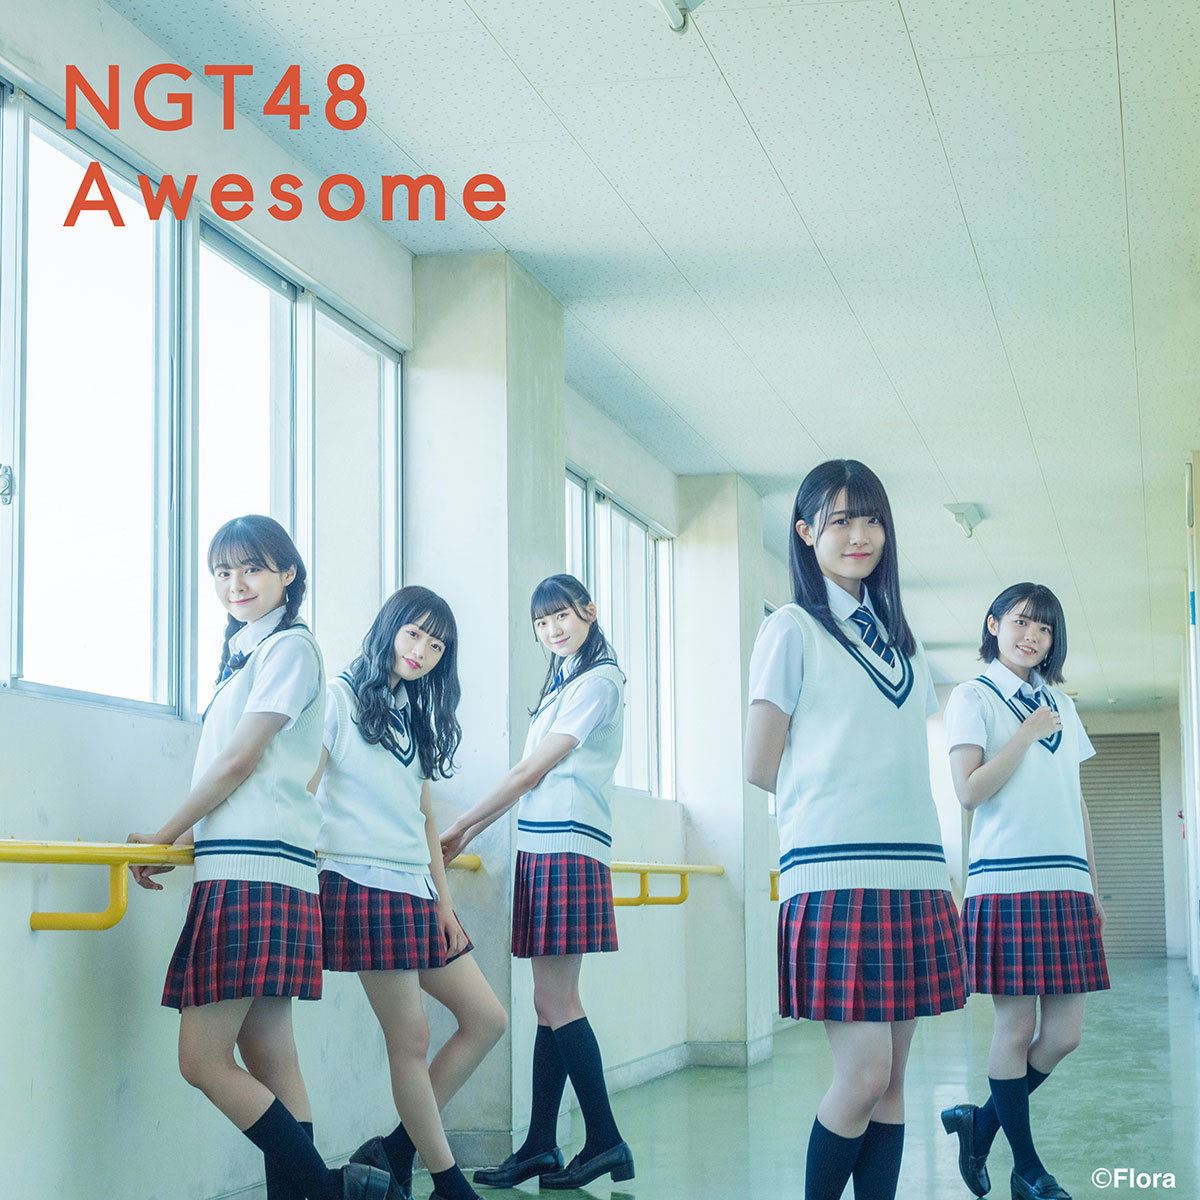 NGT48 6thシングル『Awesome』劇場盤ジャケット (C)Flora